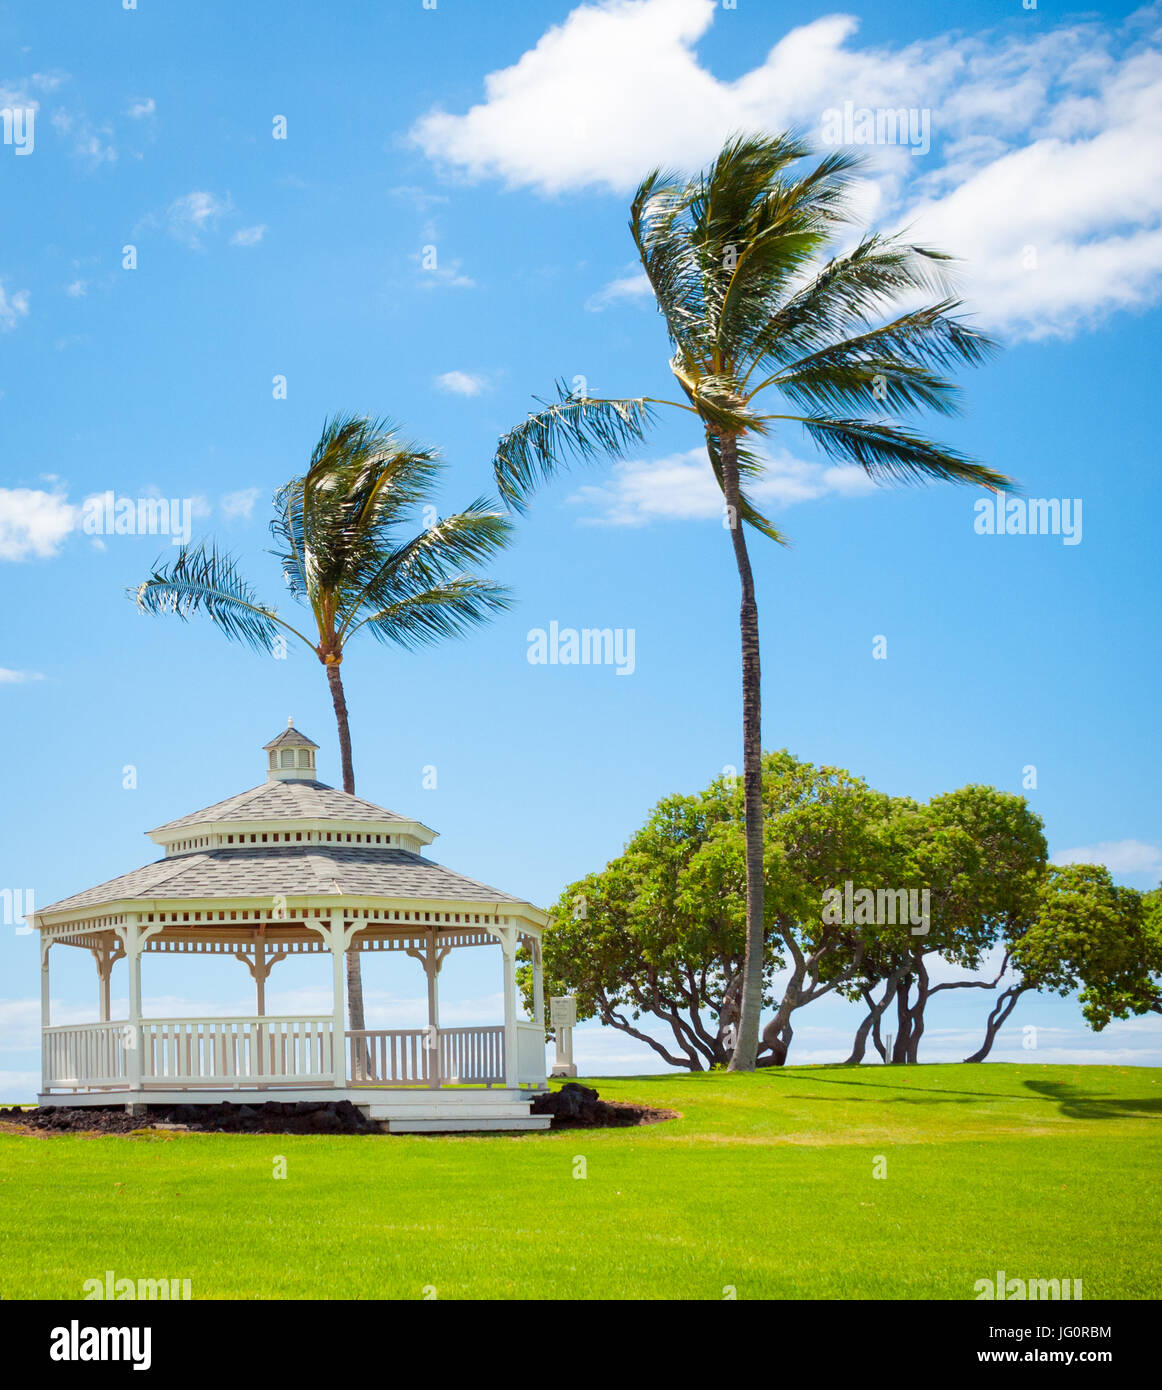 A view of the gazebo and breezy coconut palm trees at Turtle Pointe at the Fairmont Orchid on the Kohala Coast, Hawaii (Hawai'i). Stock Photo